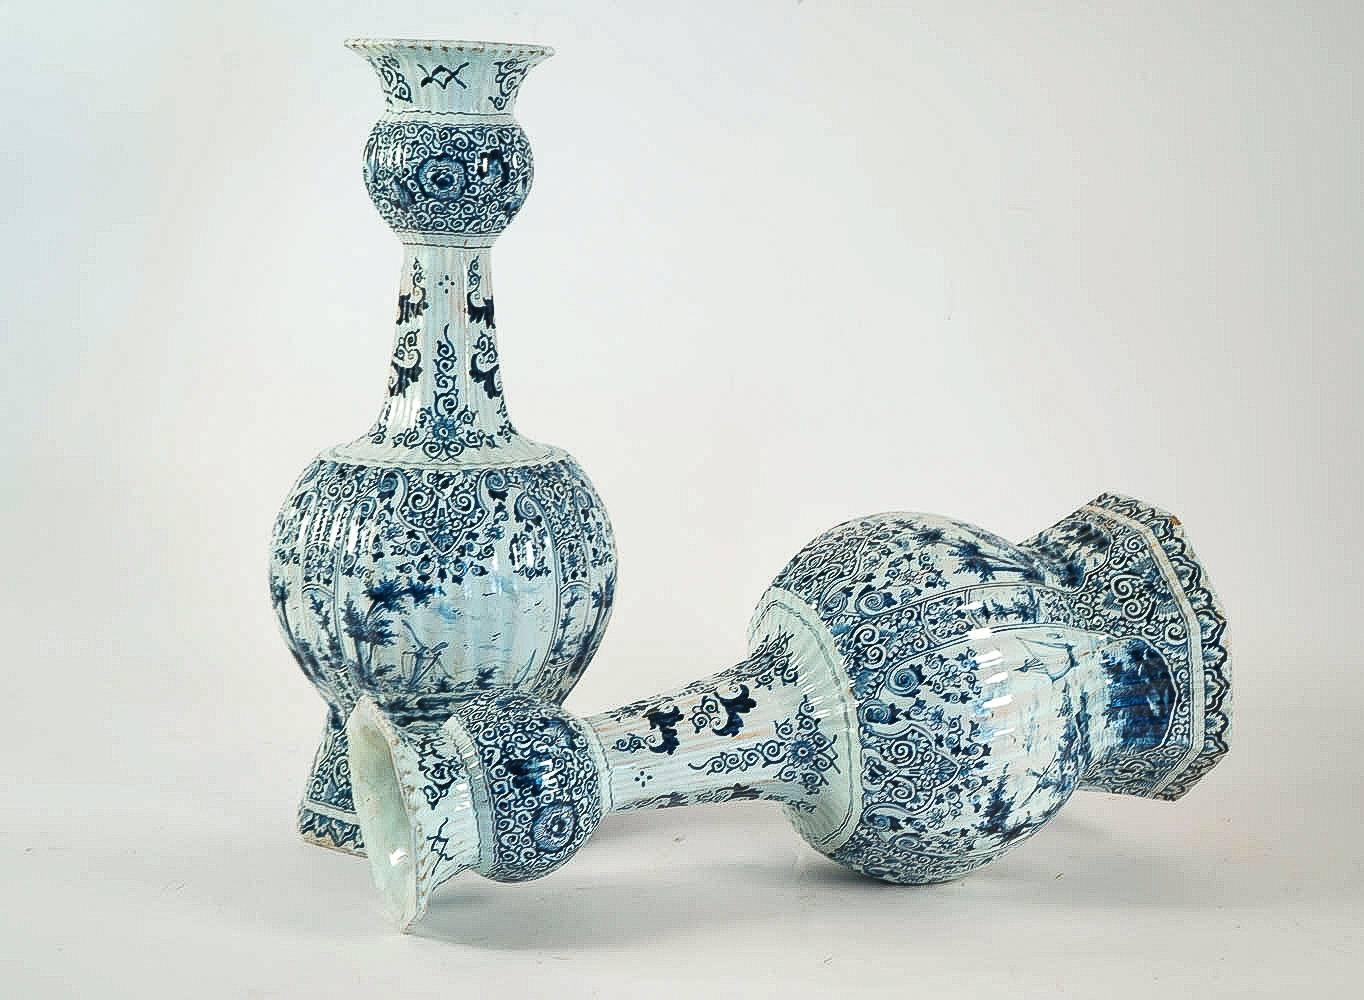 Dutch Early 19th Century, Monumental Delft Faience Pair of Gourd-Shaped Vases 8